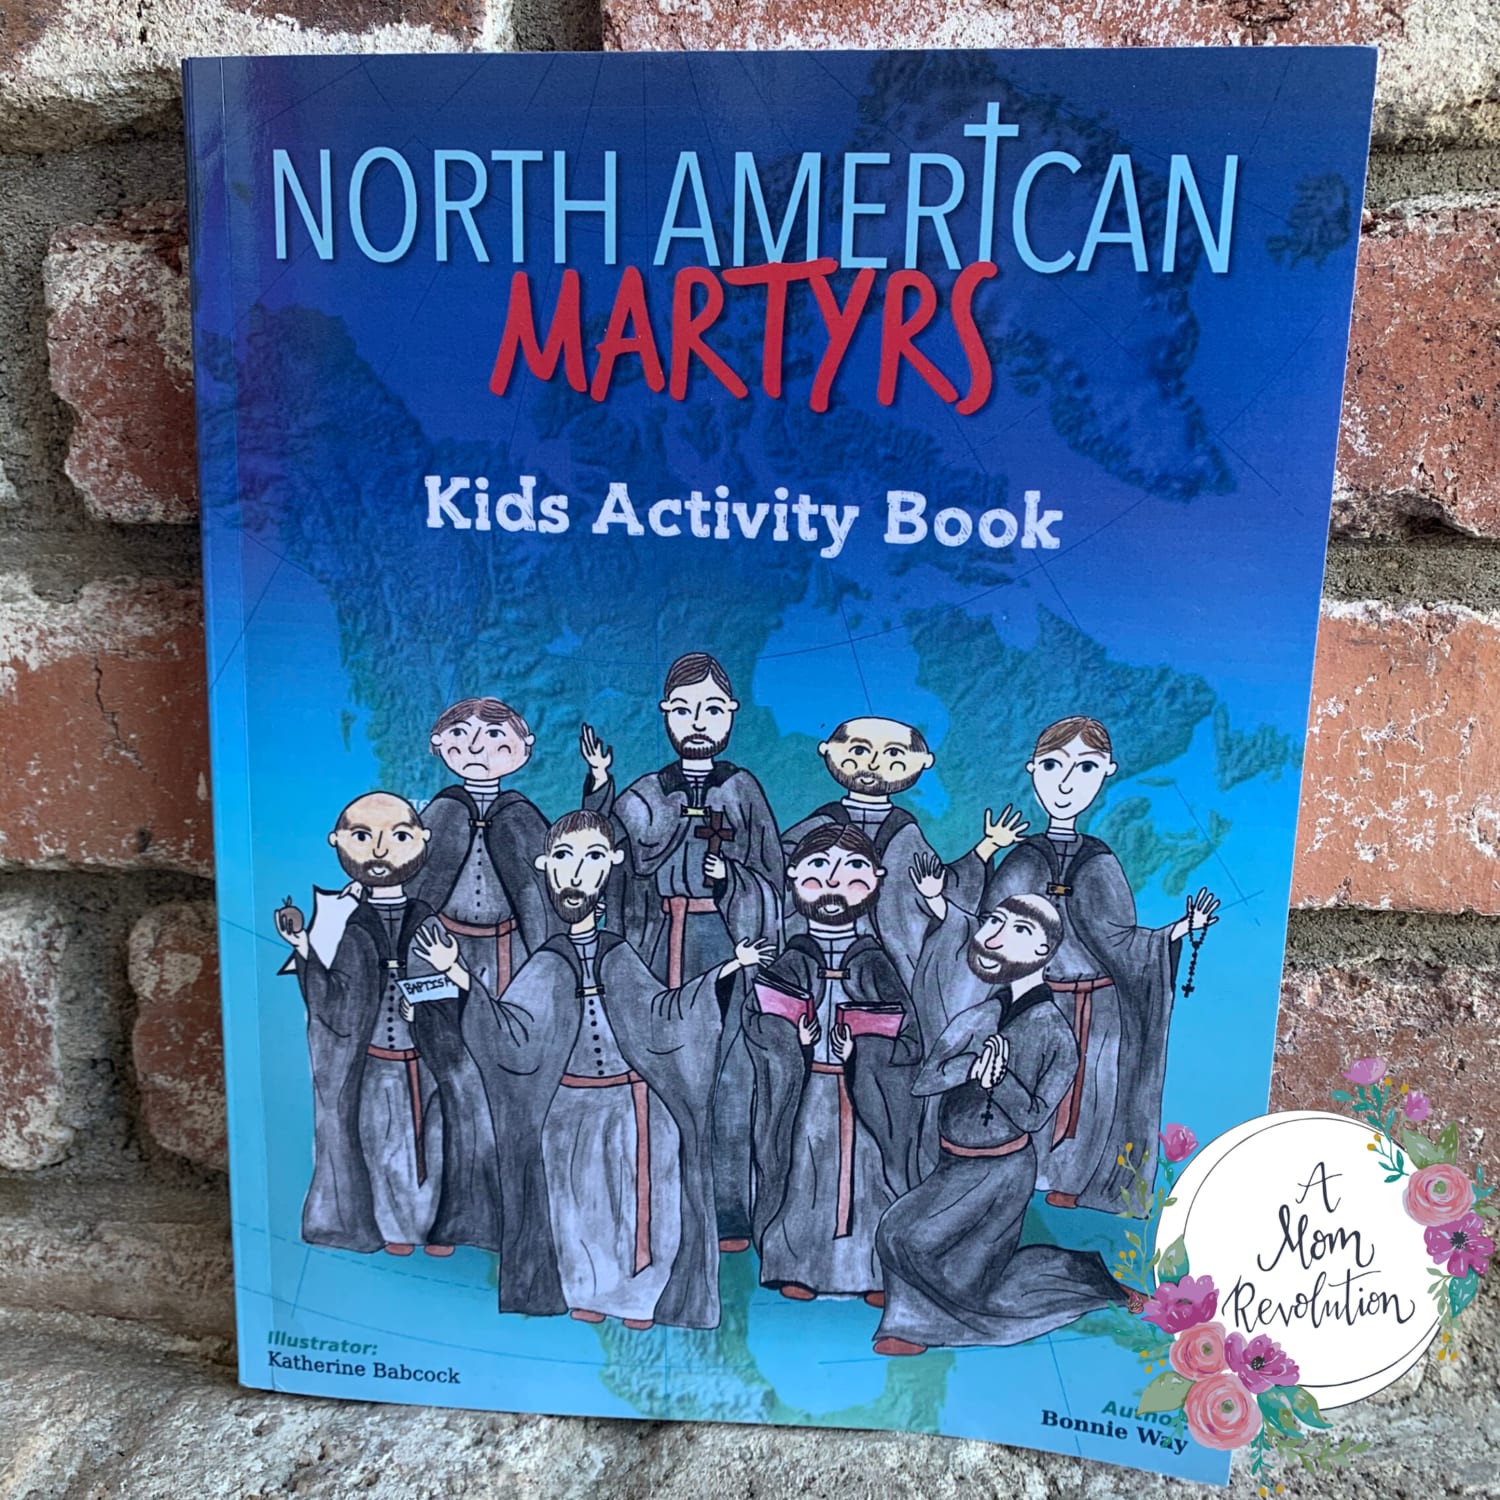 North American Martyrs Kids Activity Book Review